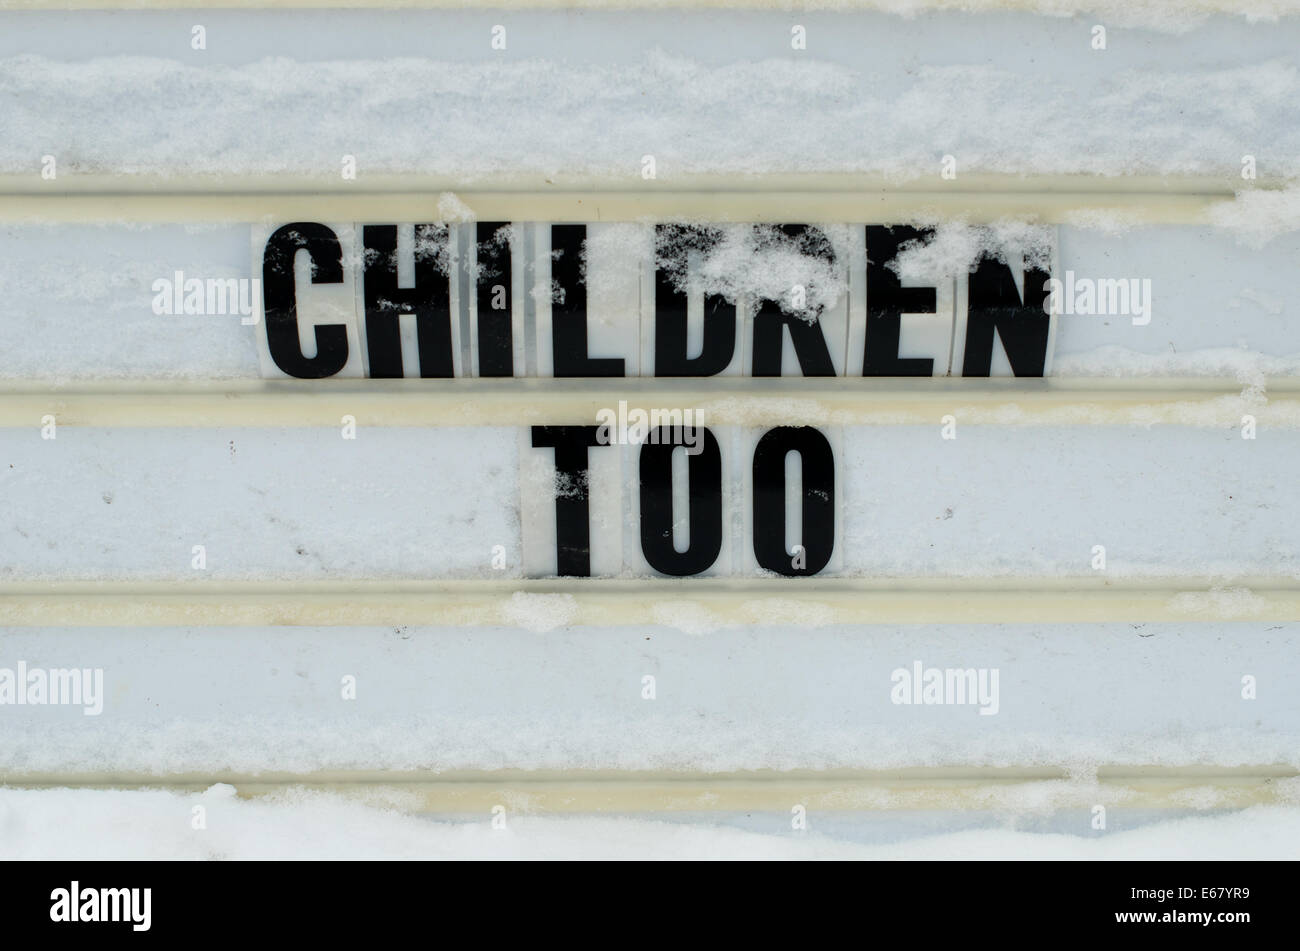 Outdoor, portable reader board with flexible plastic marquee sign letters saying 'Children too' Stock Photo